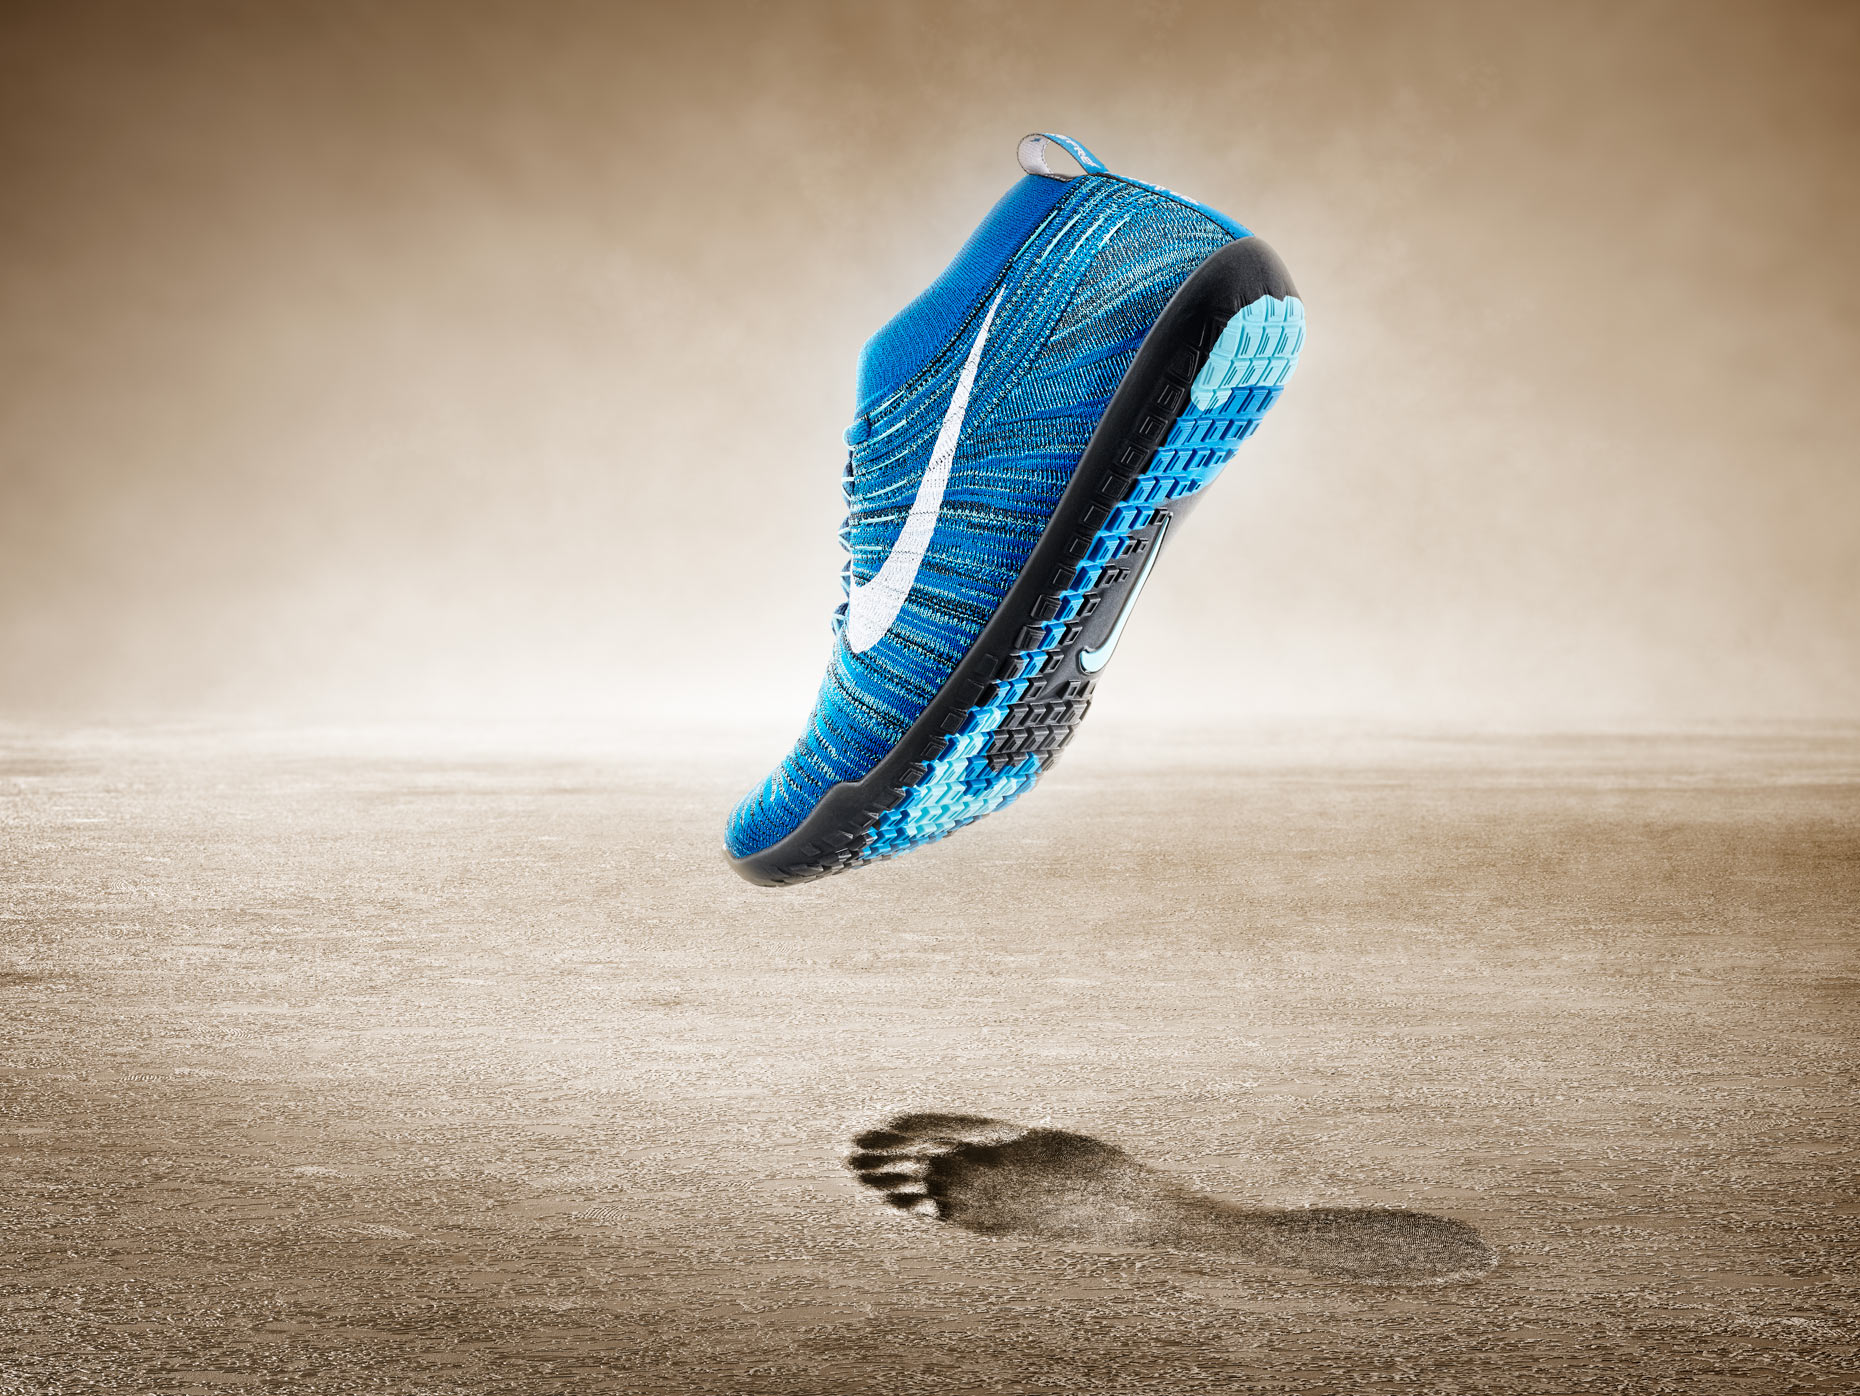 Nike Hyperfeel Image Composite, Effects and Retouching